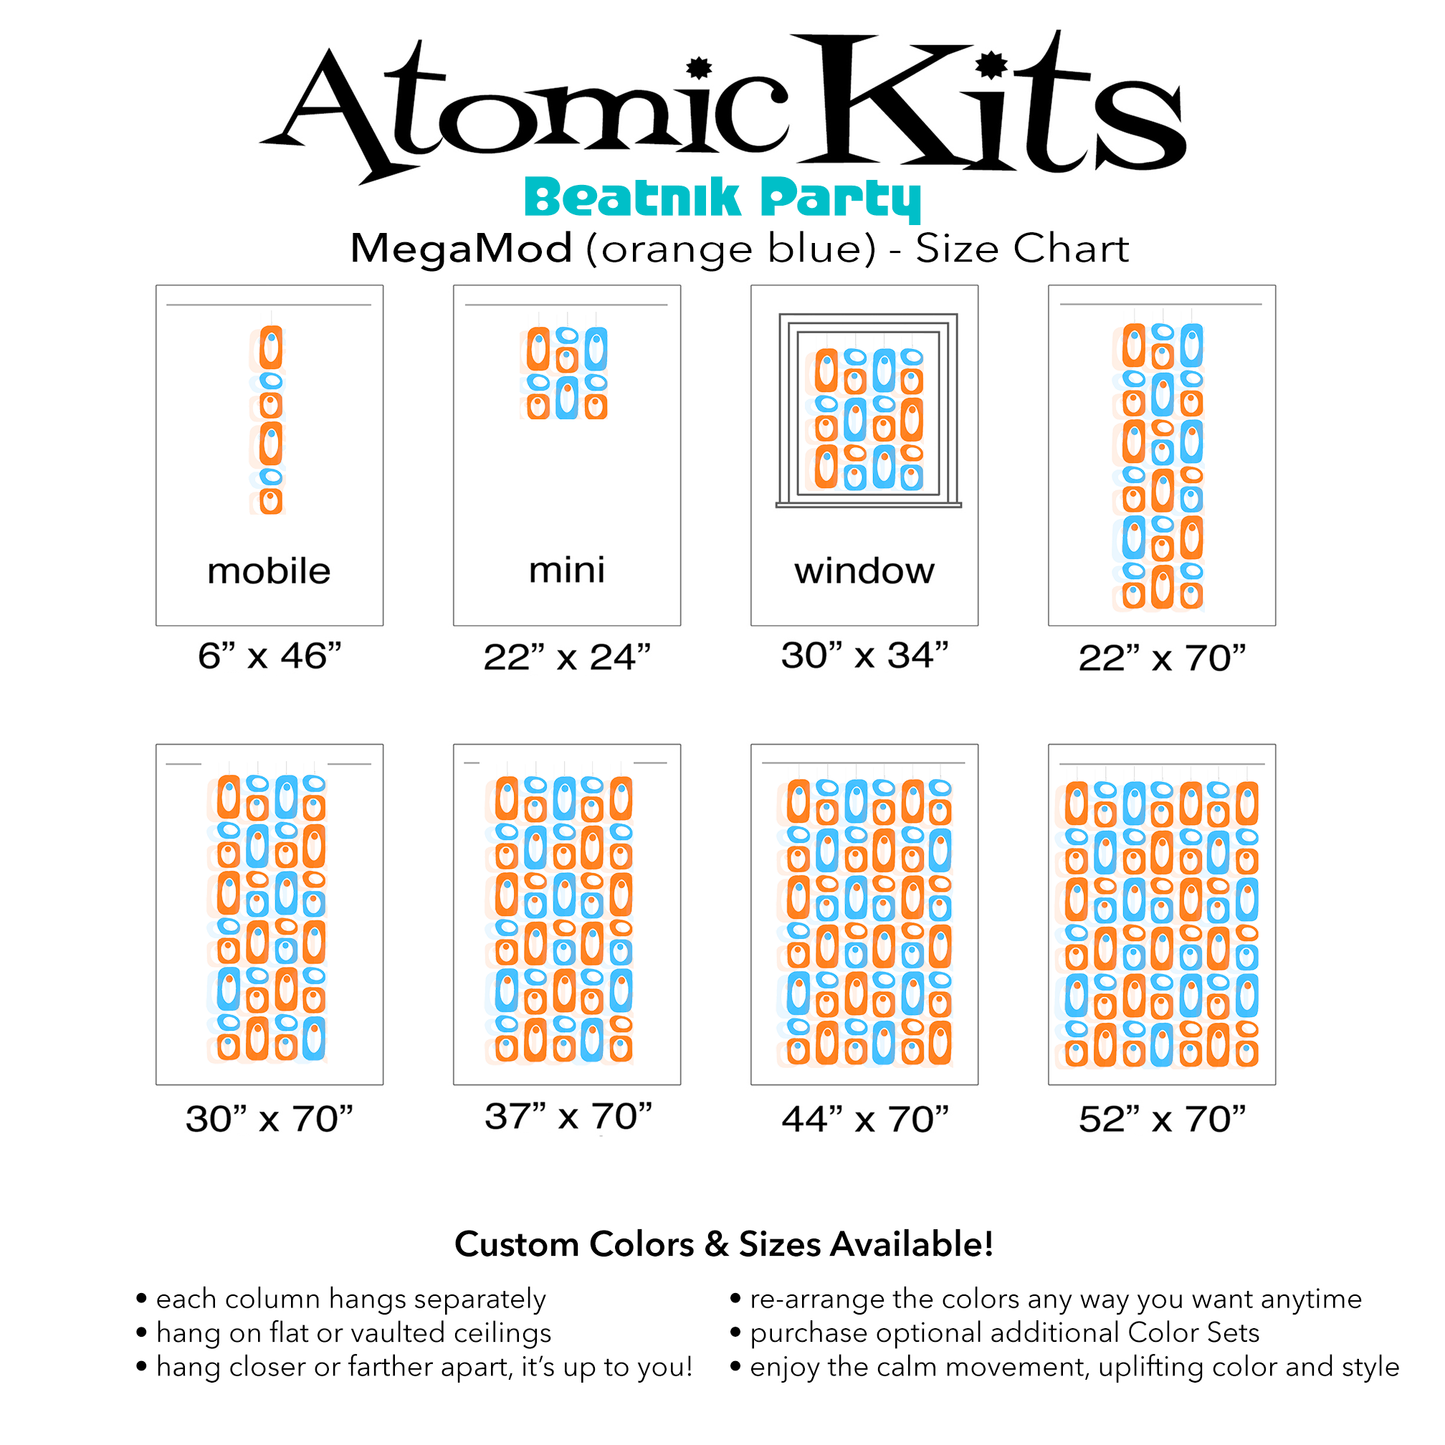 Color Chart for pretty orange and blue DIY Atomic Kits made from clear plexiglass acrylic - Mid Century Modern retro hanging art mobiles, curtains, room dividers, screens by AtomicMobiles.com